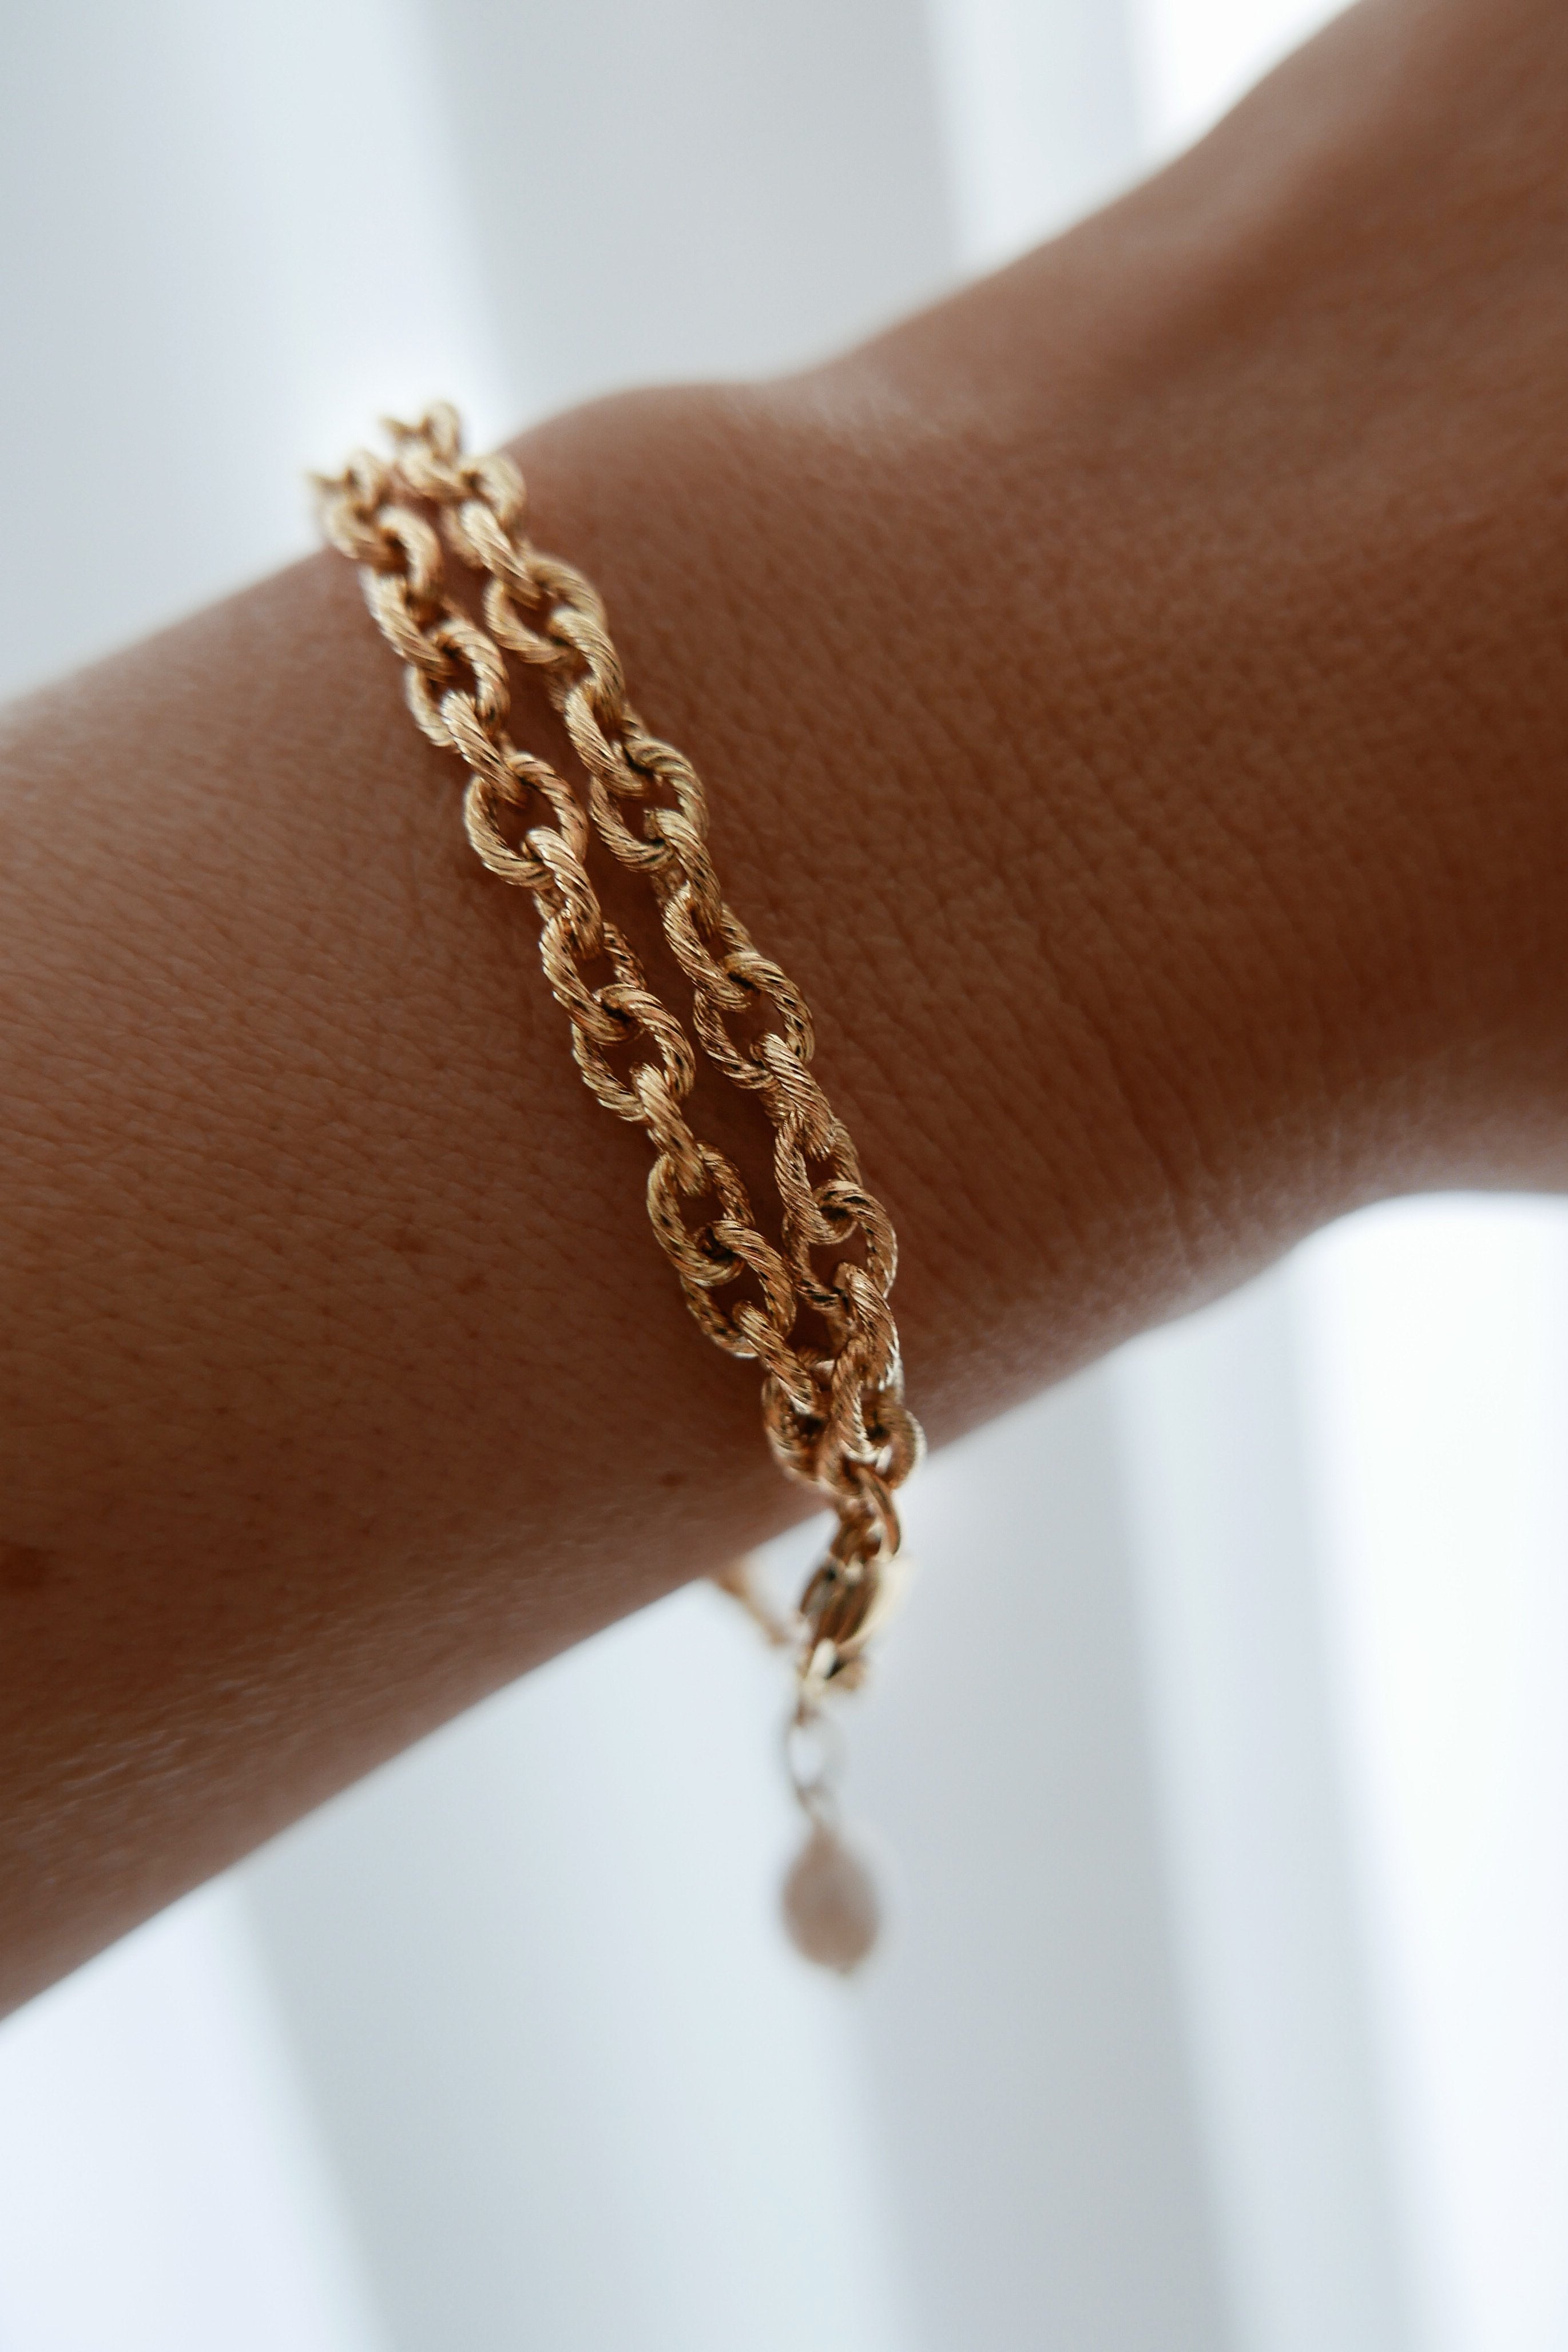 Claire Bracelet - Boutique Minimaliste has waterproof, durable, elegant and vintage inspired jewelry